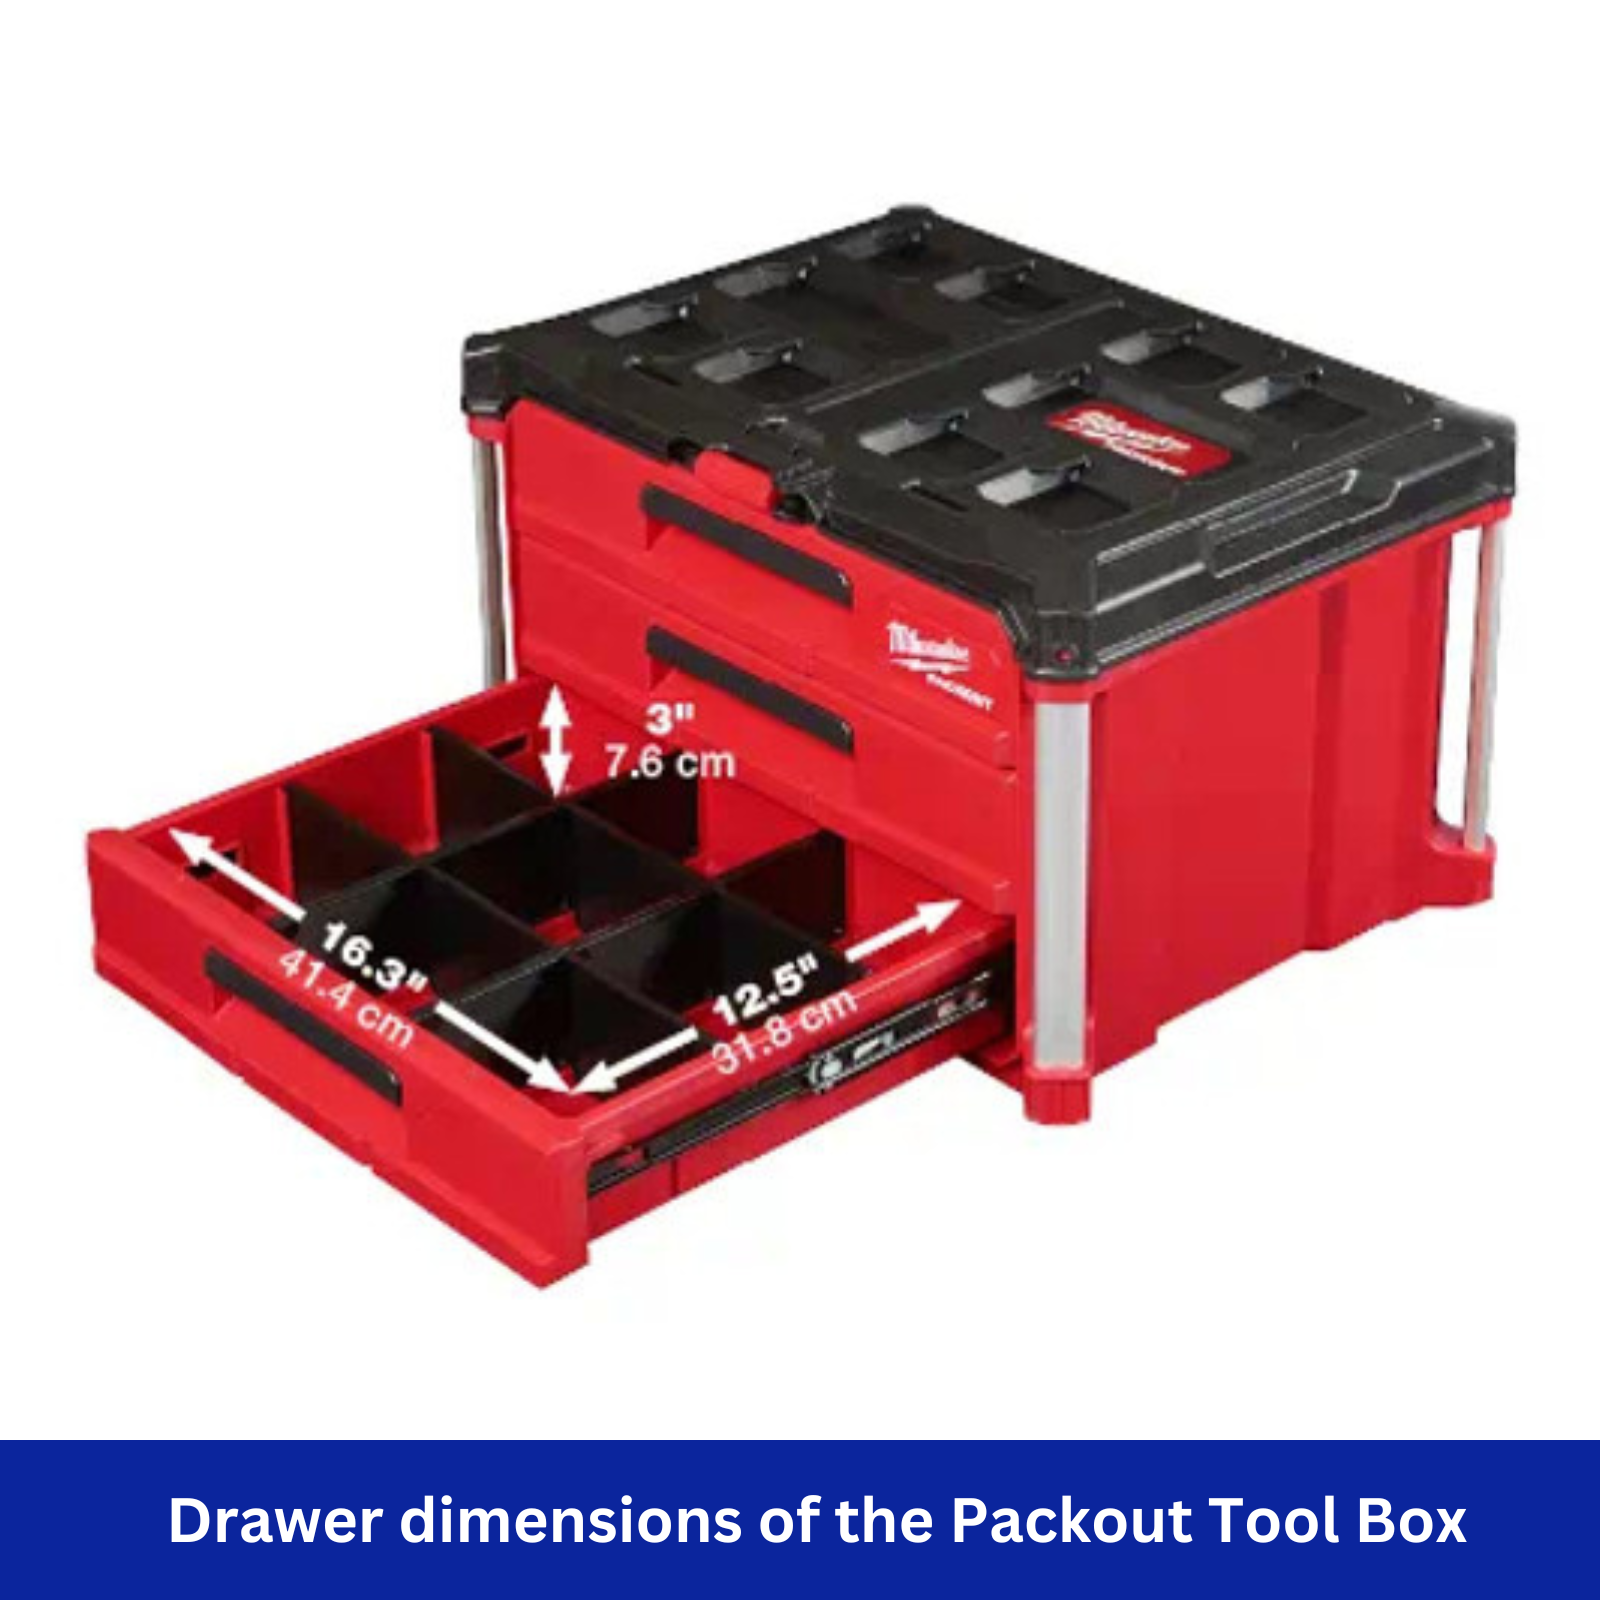 New Milwaukee Packout 3 Drawer Toolbox Part of PACKOUT Modular